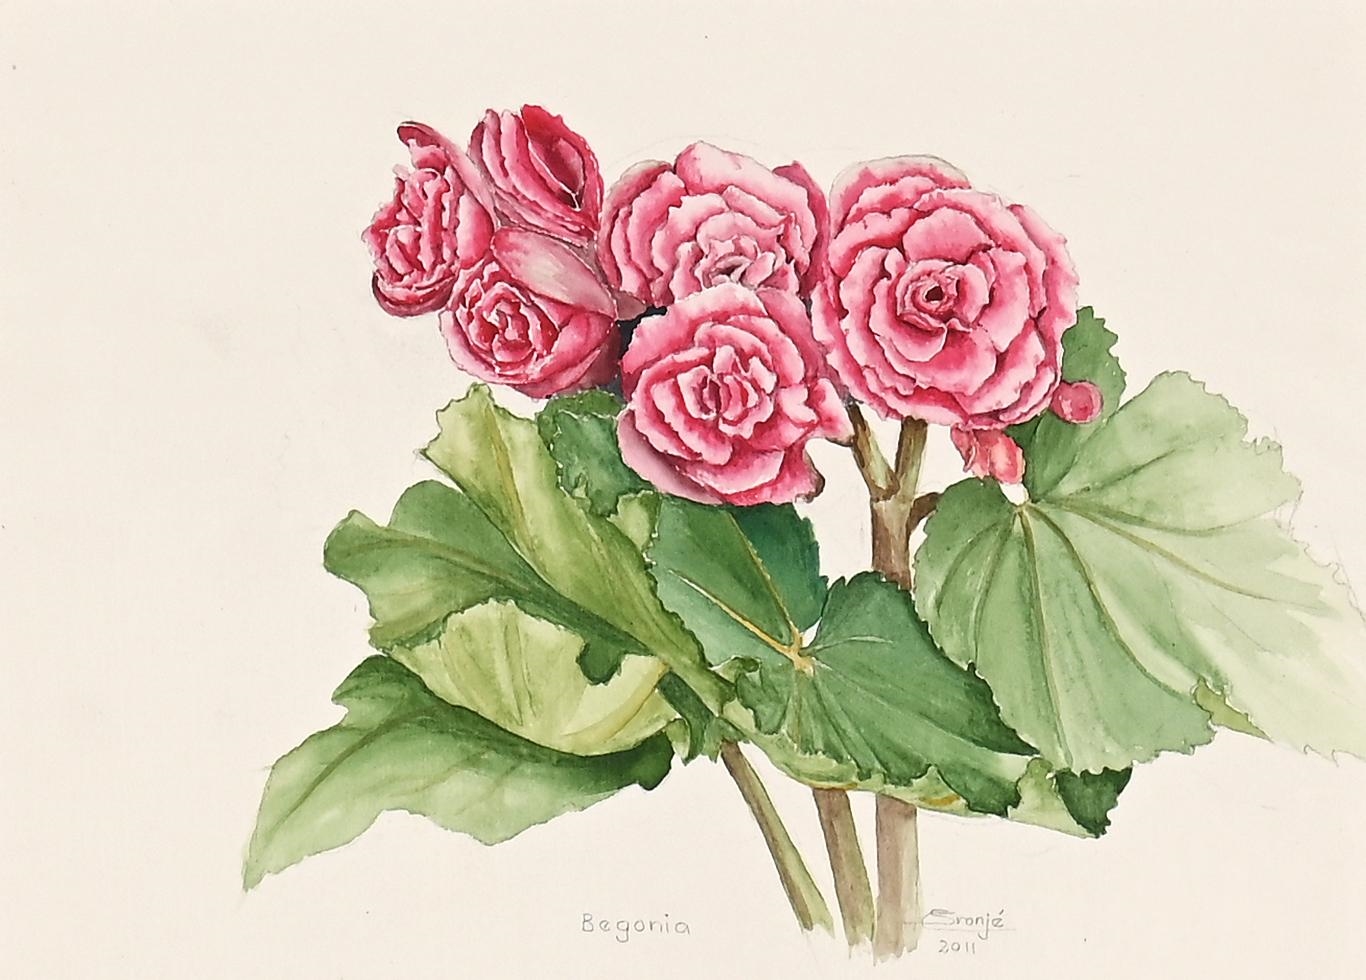 Begonia by Susan Cronje, dated 2011